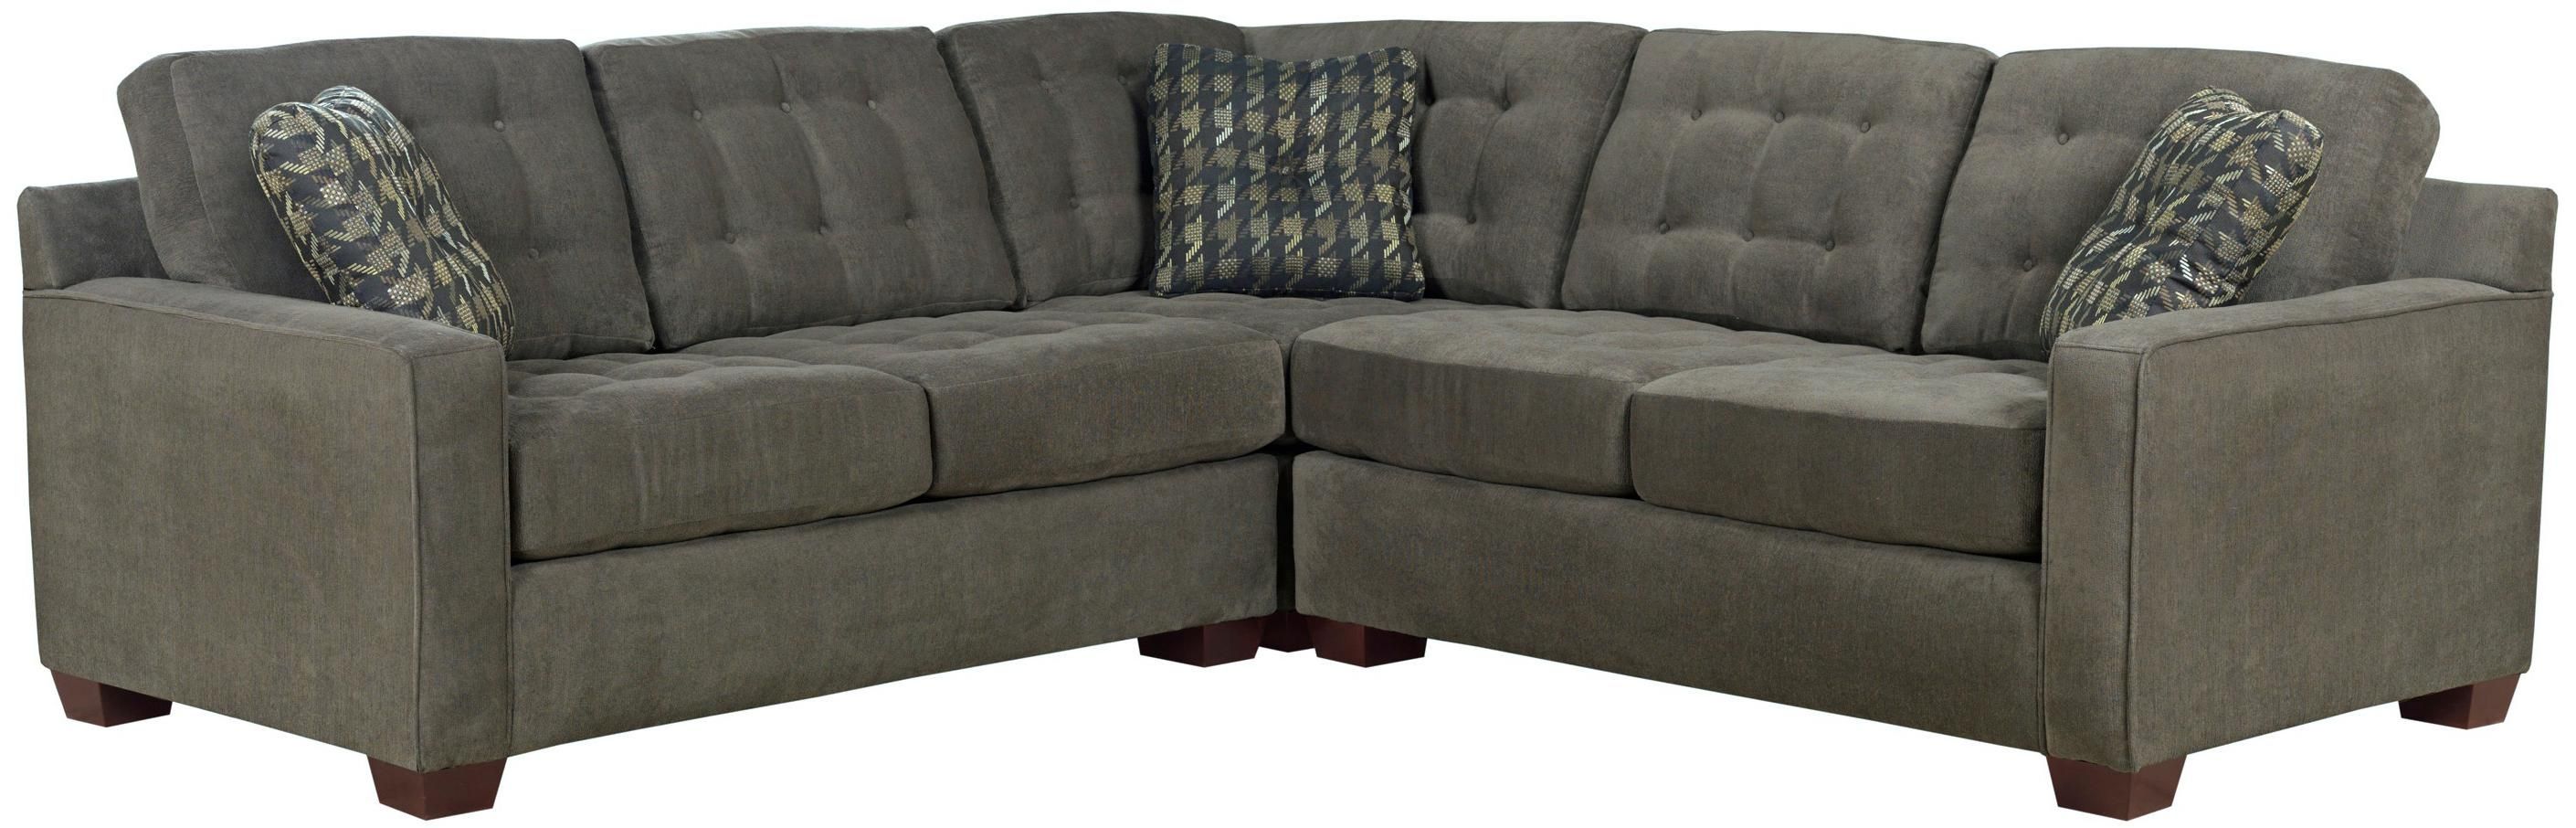 Broyhill Furniture Tribeca Contemporary L Shaped Sectional Sofa Inside Broyhill Sectional Sofas (Photo 8 of 15)